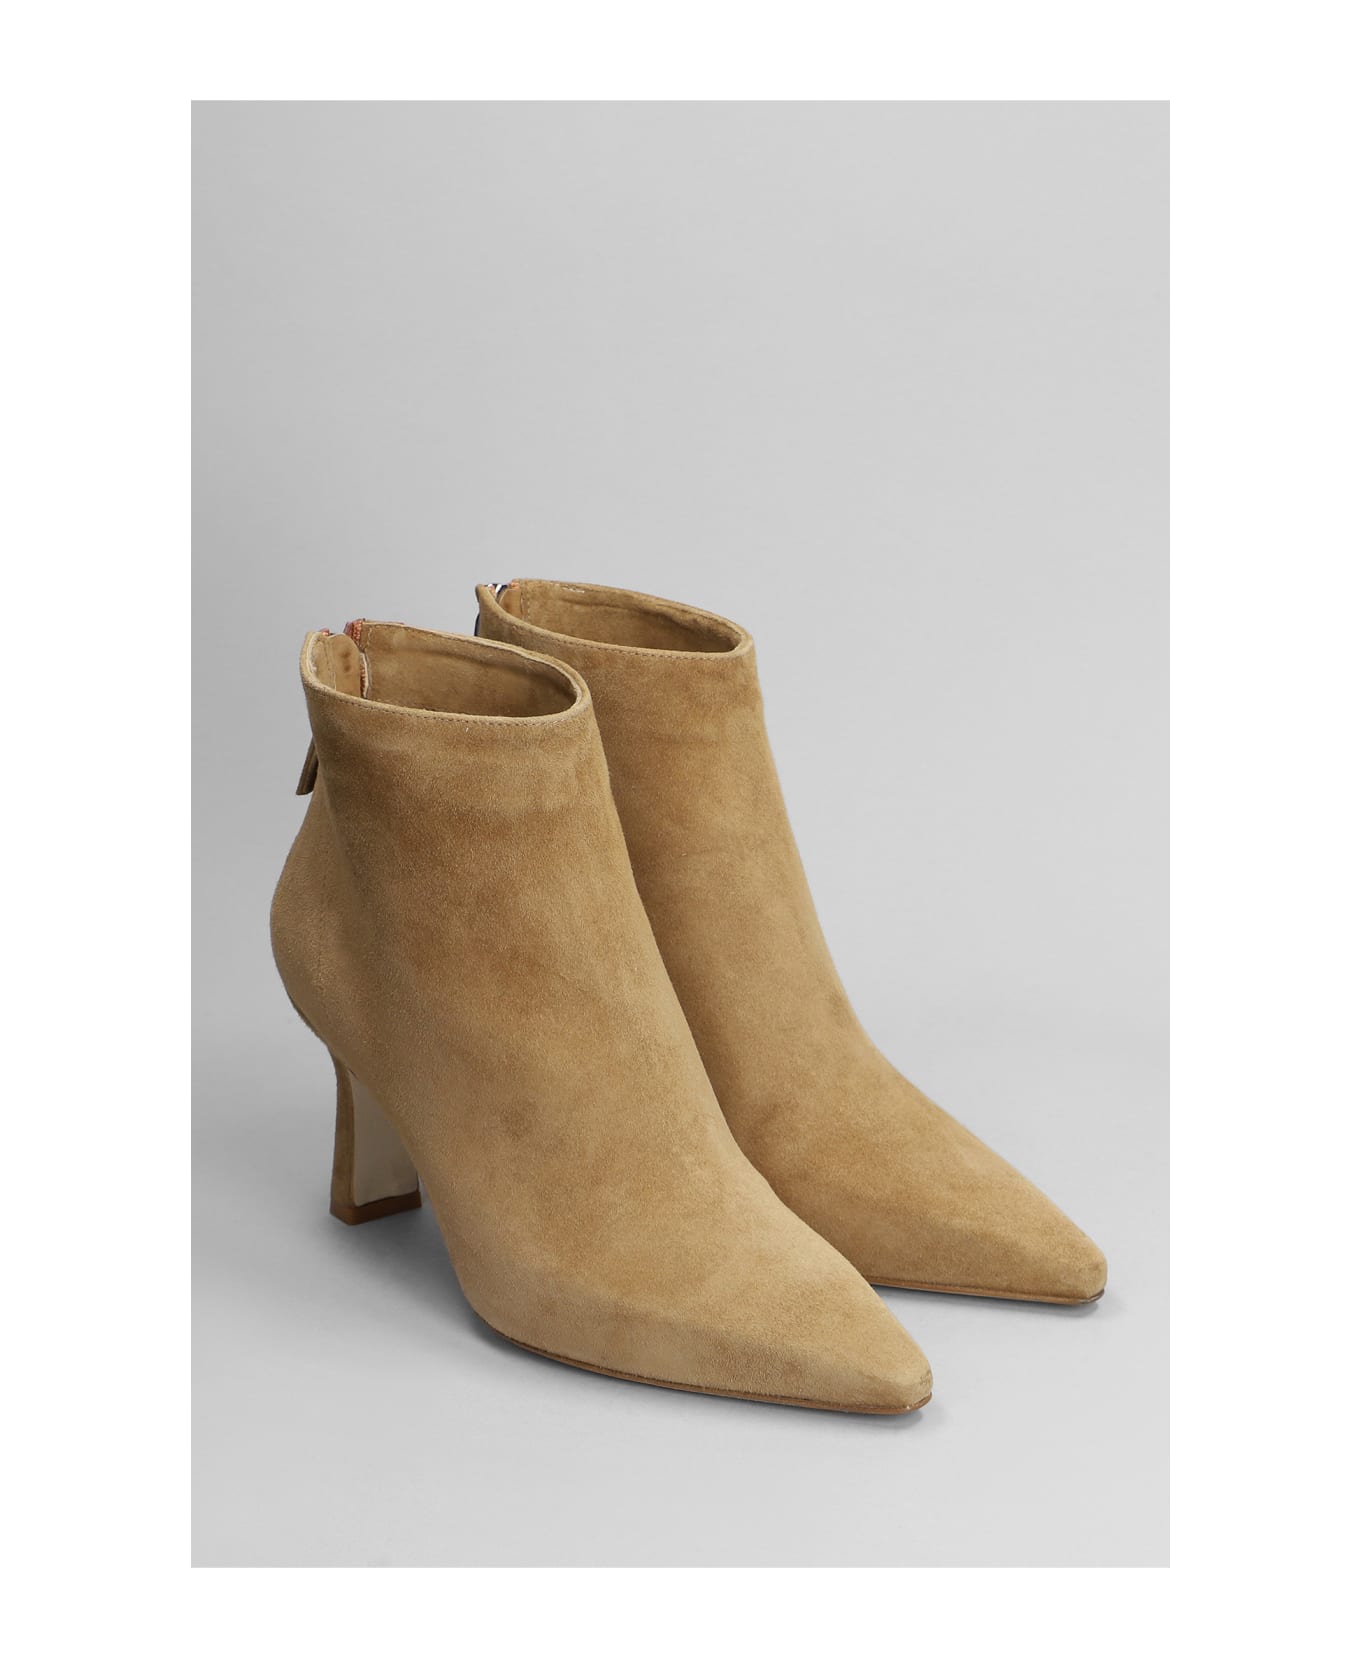 The Seller High Heels Ankle Boots In Leather Color Suede - leather color